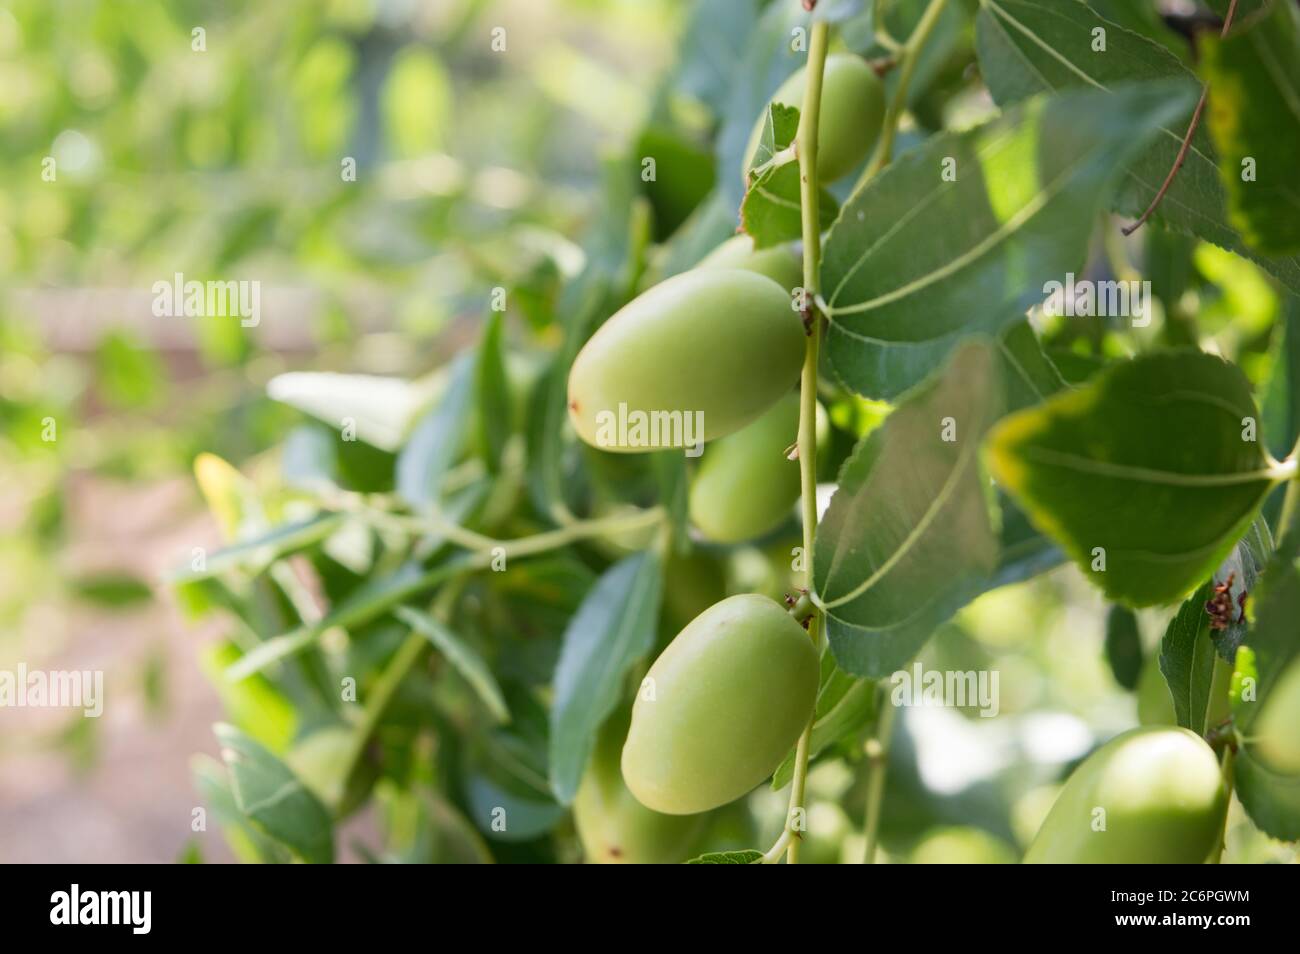 Mediterranean fruit, Ziziphus jujuba, called chinese date or red date; close up of unripe jujube fruits Stock Photo